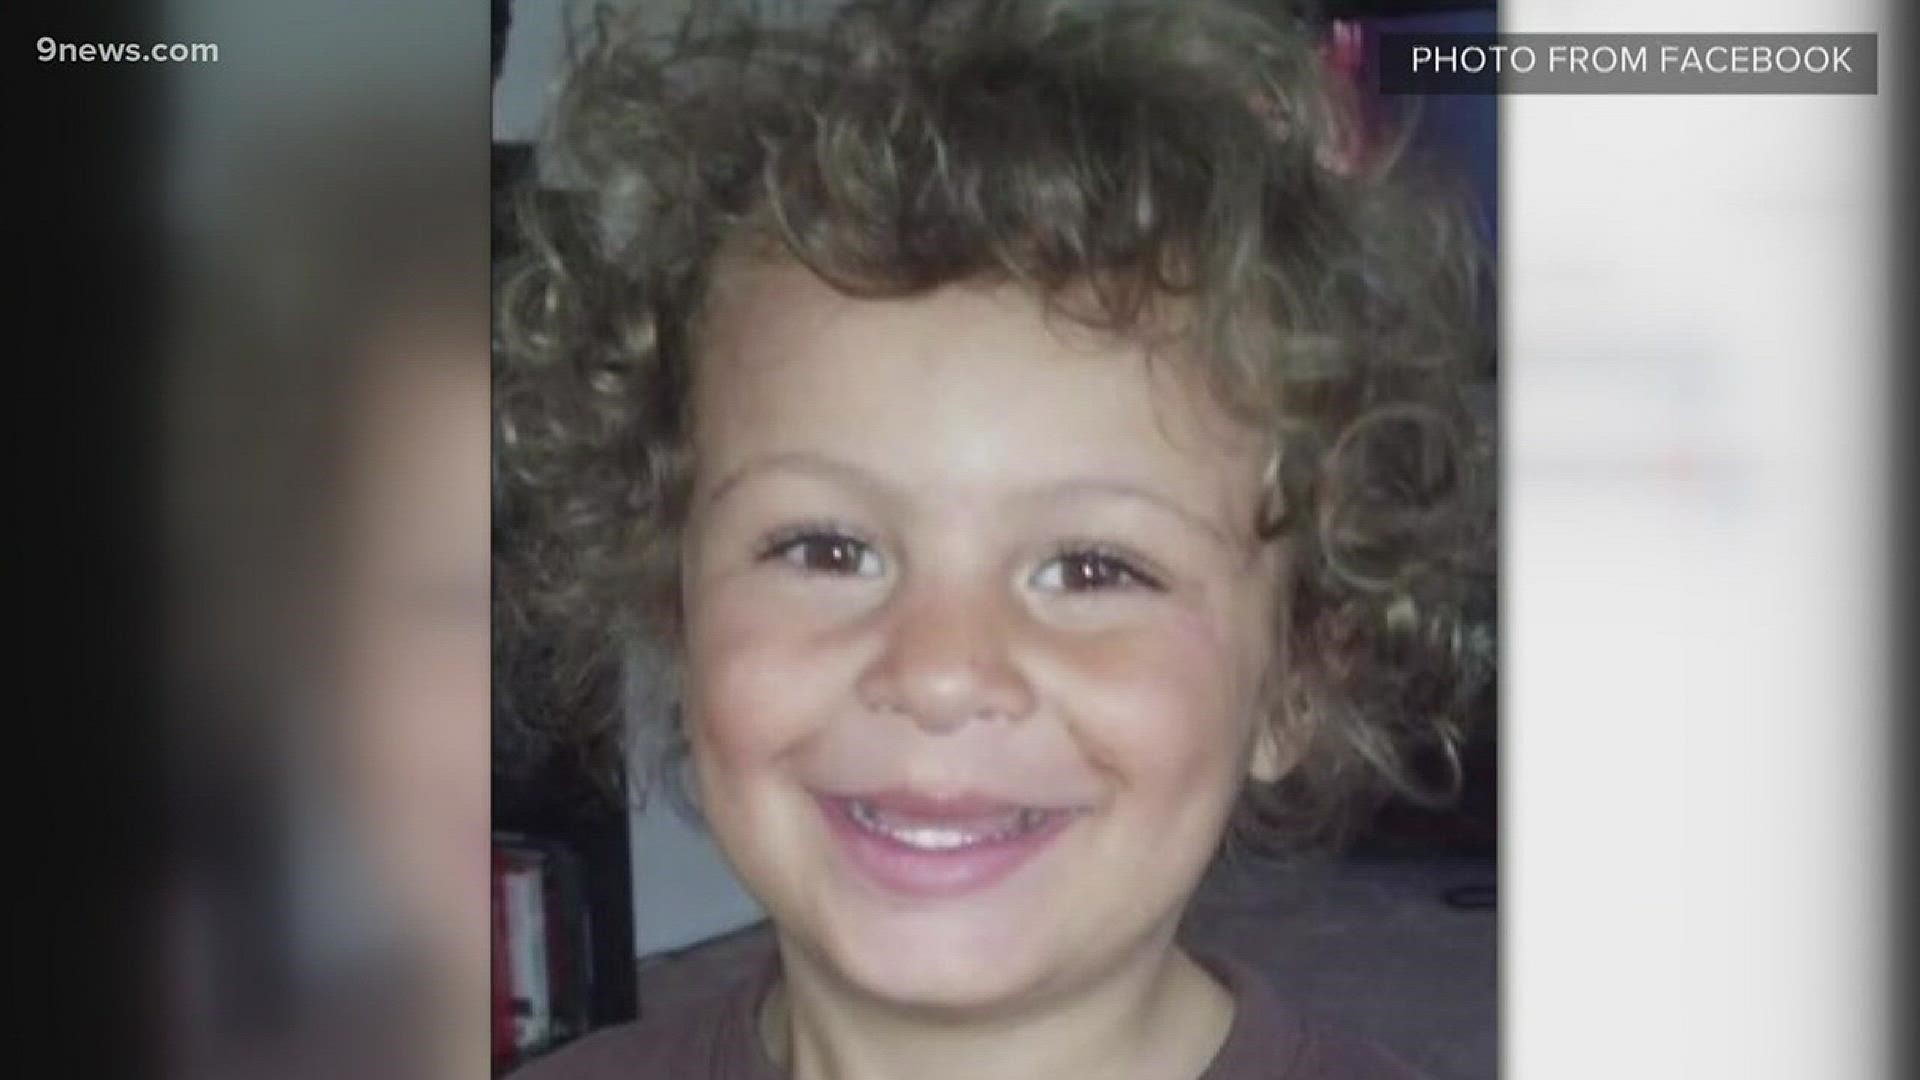 The young boy had traces of cocaine and meth in his liver, according to the report. Even though the autopsy is complete, no official cause of death could be determined.